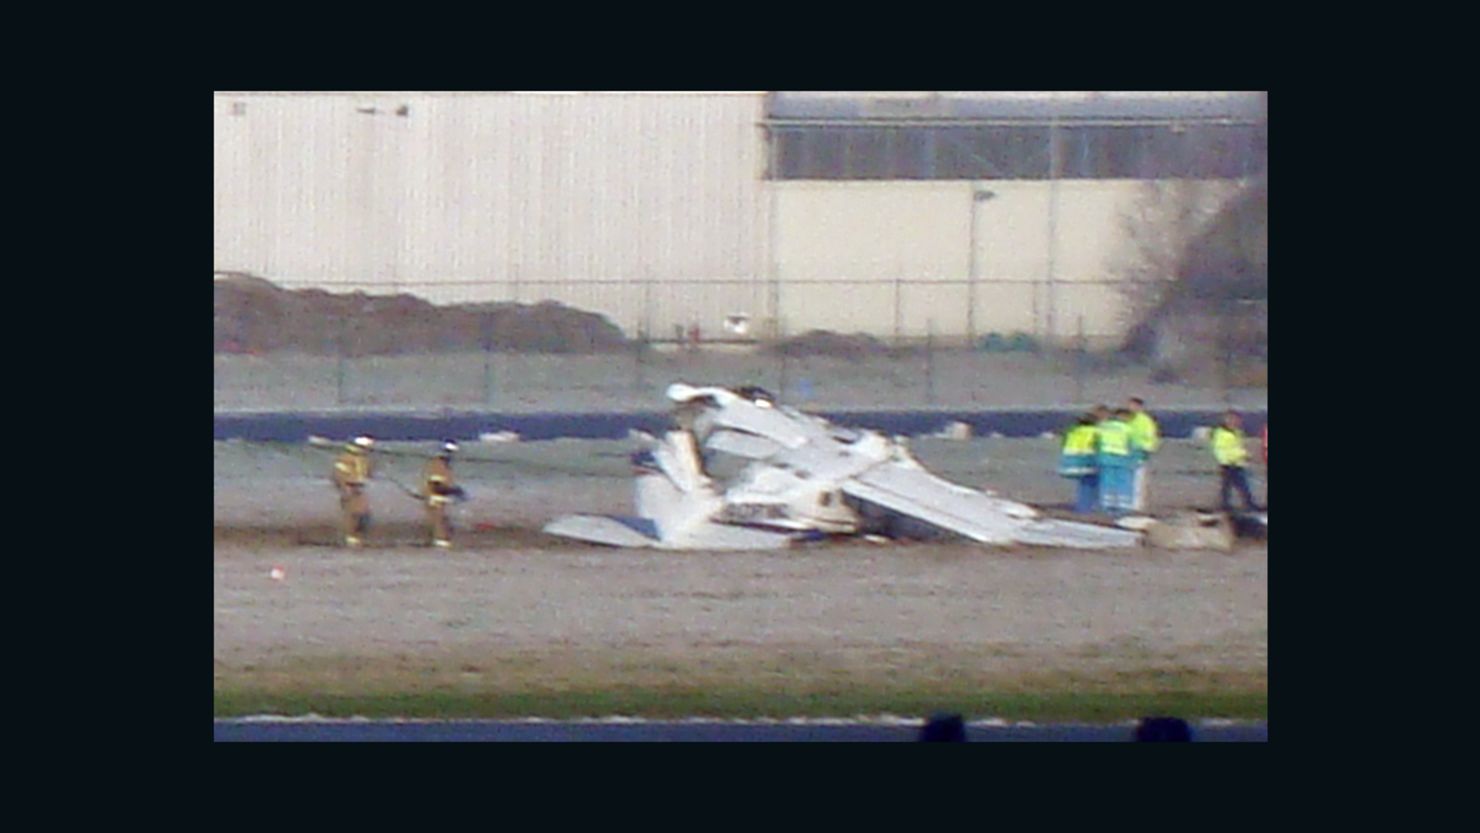 Rescuers gather around the crashed Cessna passenger plane at Brussels South airport in Charleroi, on February 9.